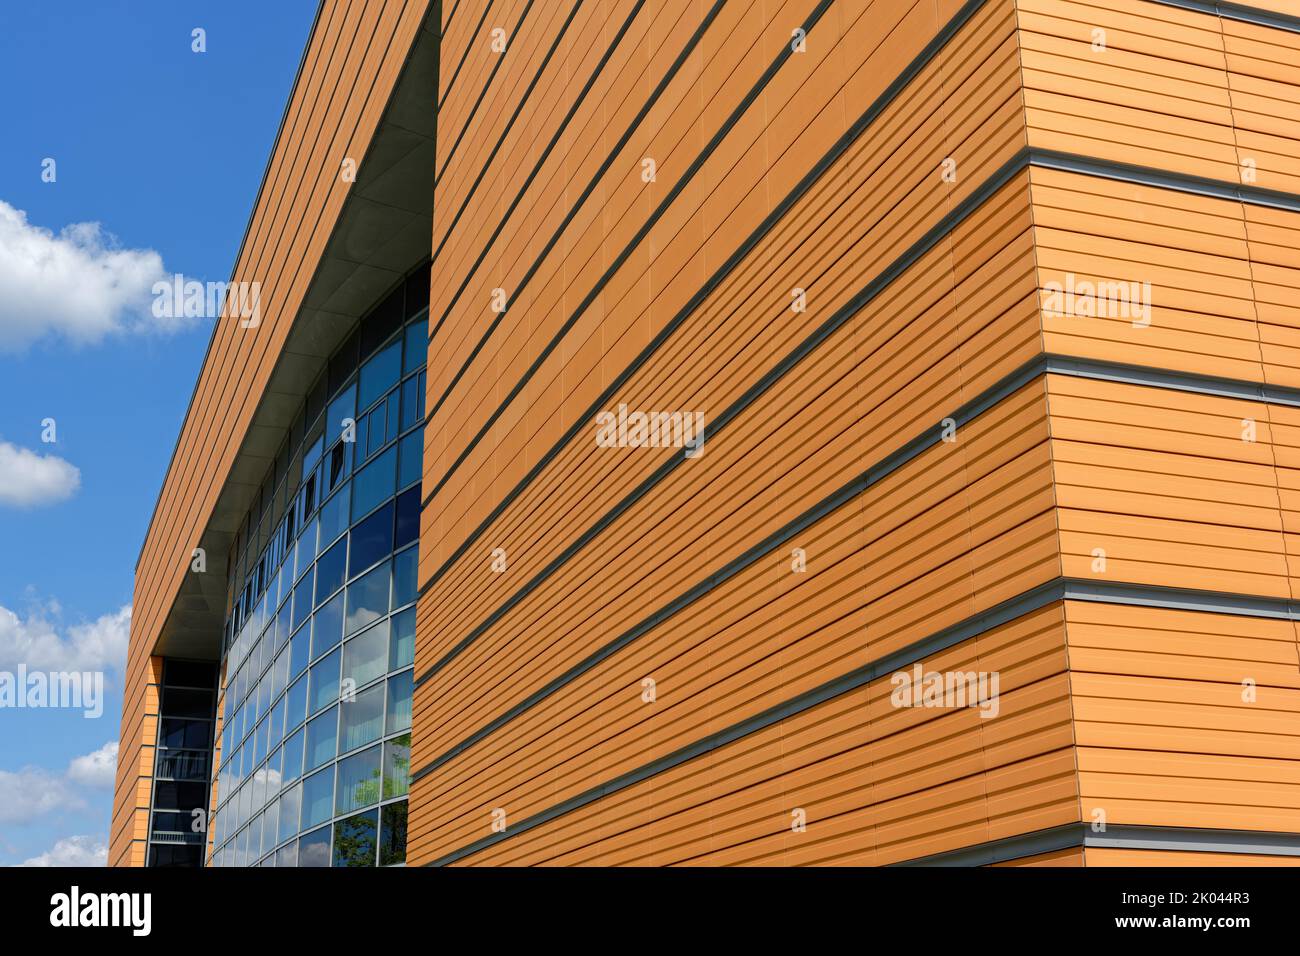 Modern facade of an event arena on the Expo Plaza in Hanover, Germany Stock Photo